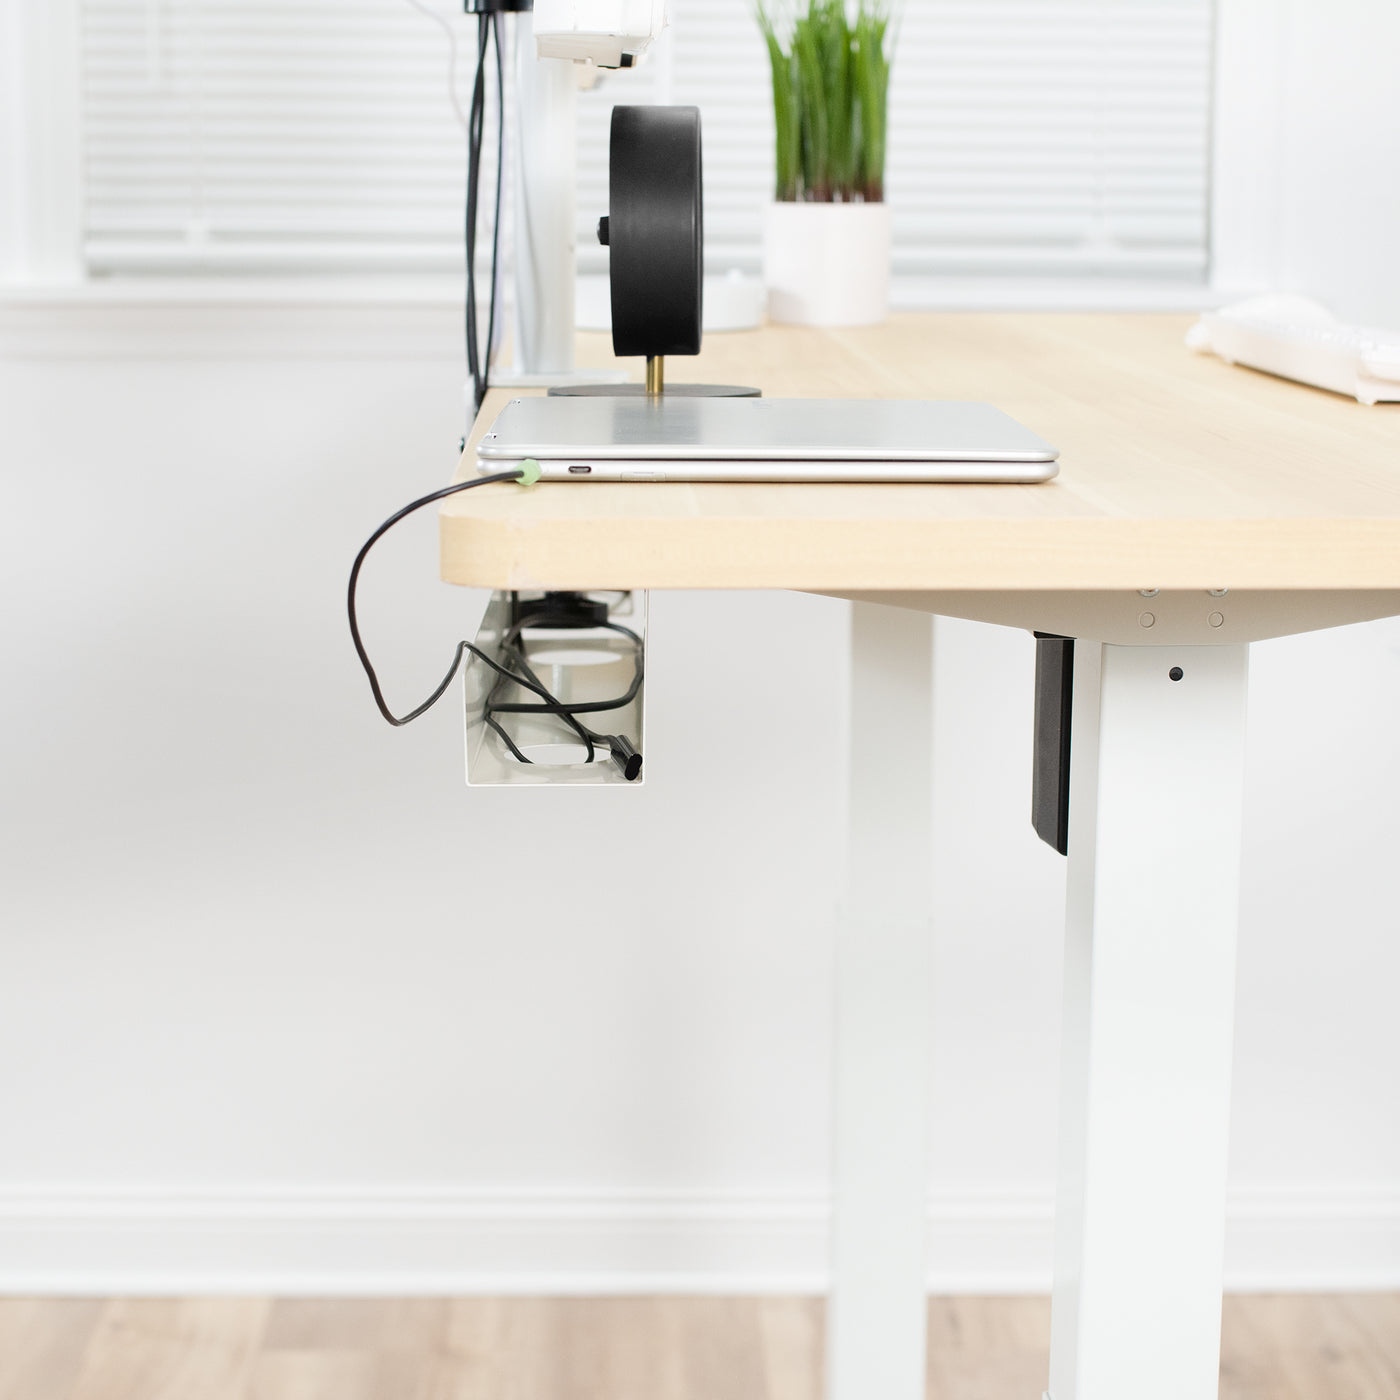 Cable Management for Standing Desk, Installation, Review, and Thoughts